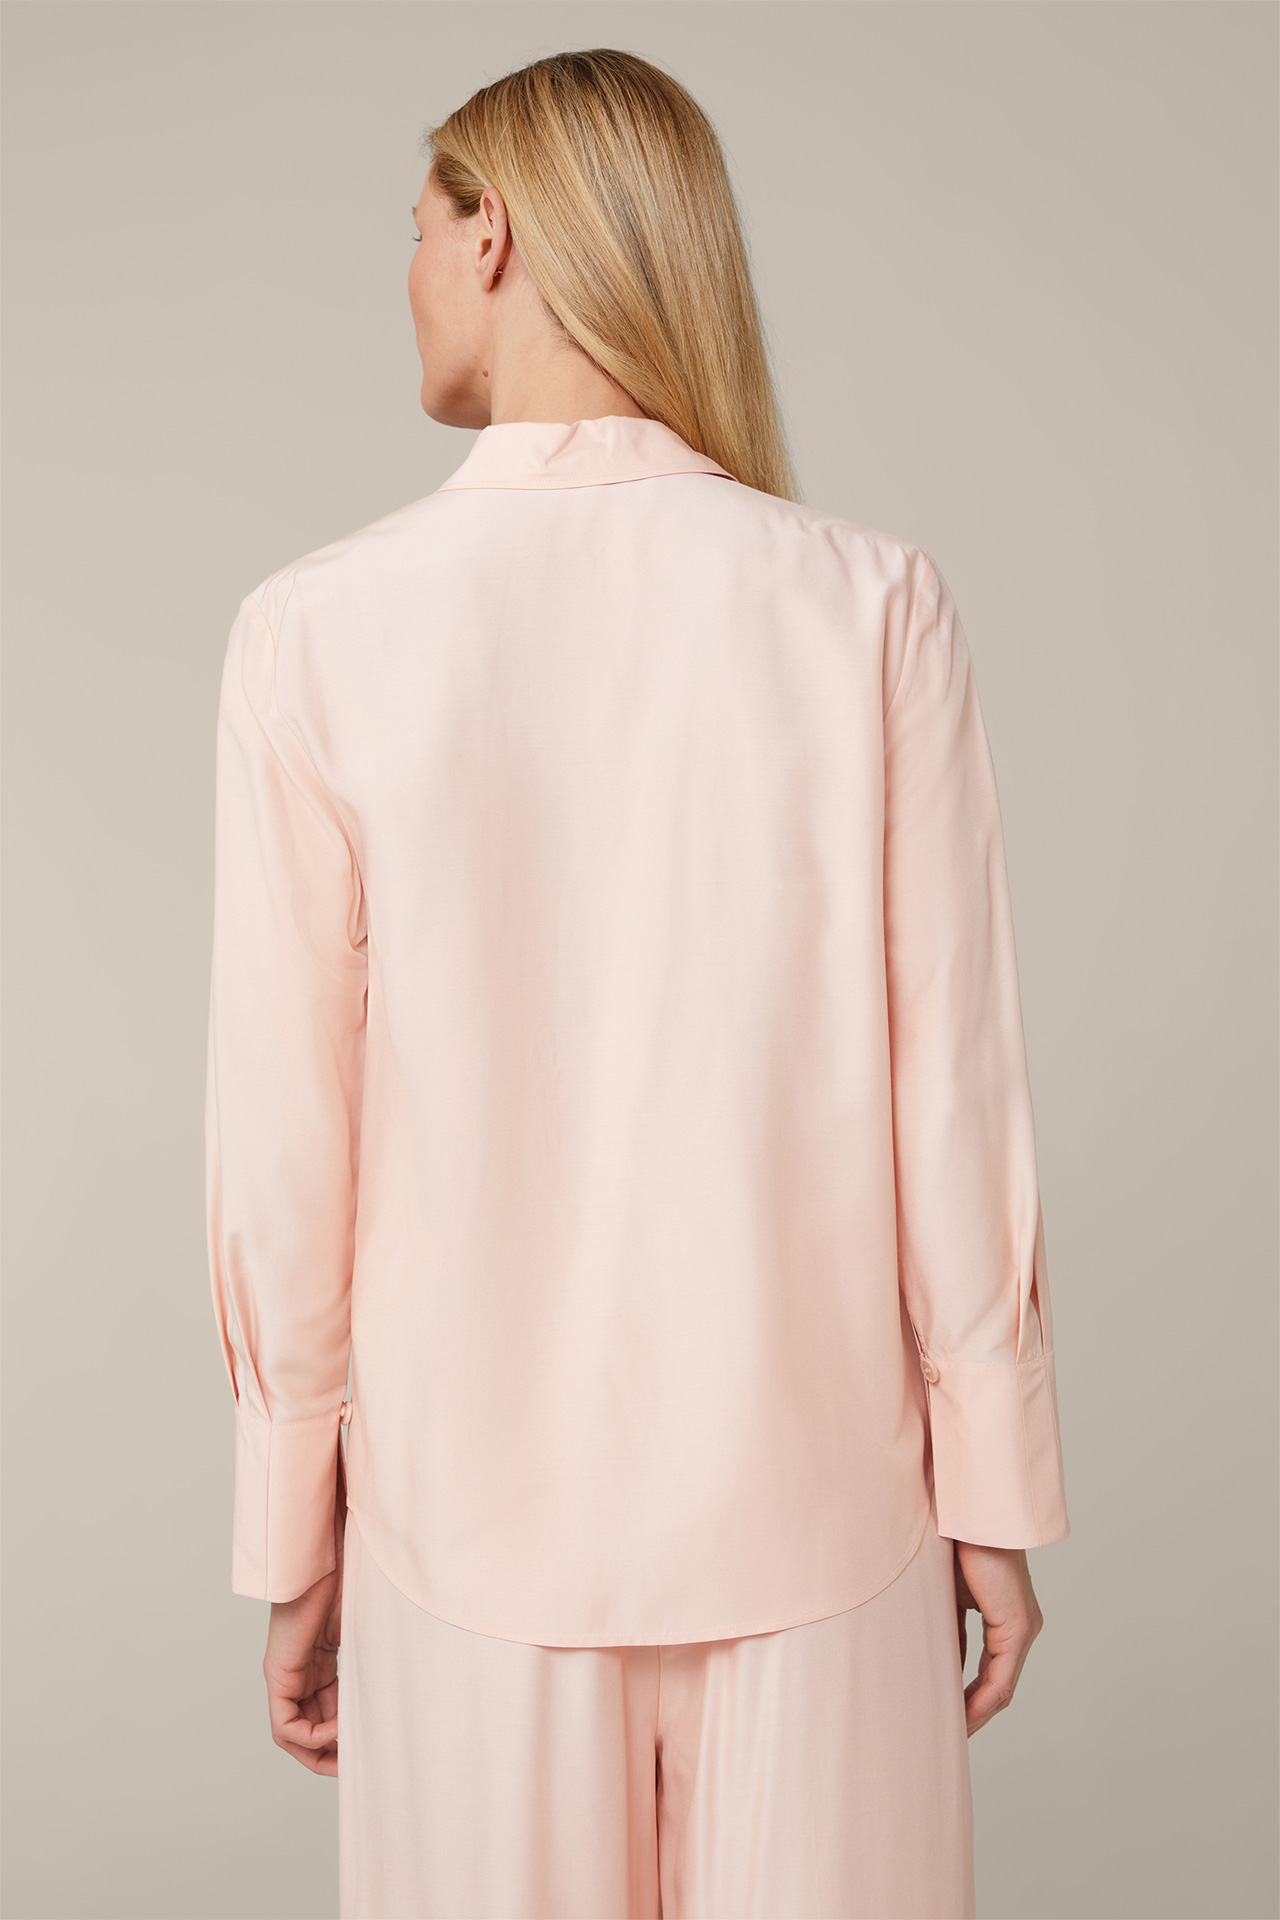 Satin Blouse made of Viscose and Silk in Peach